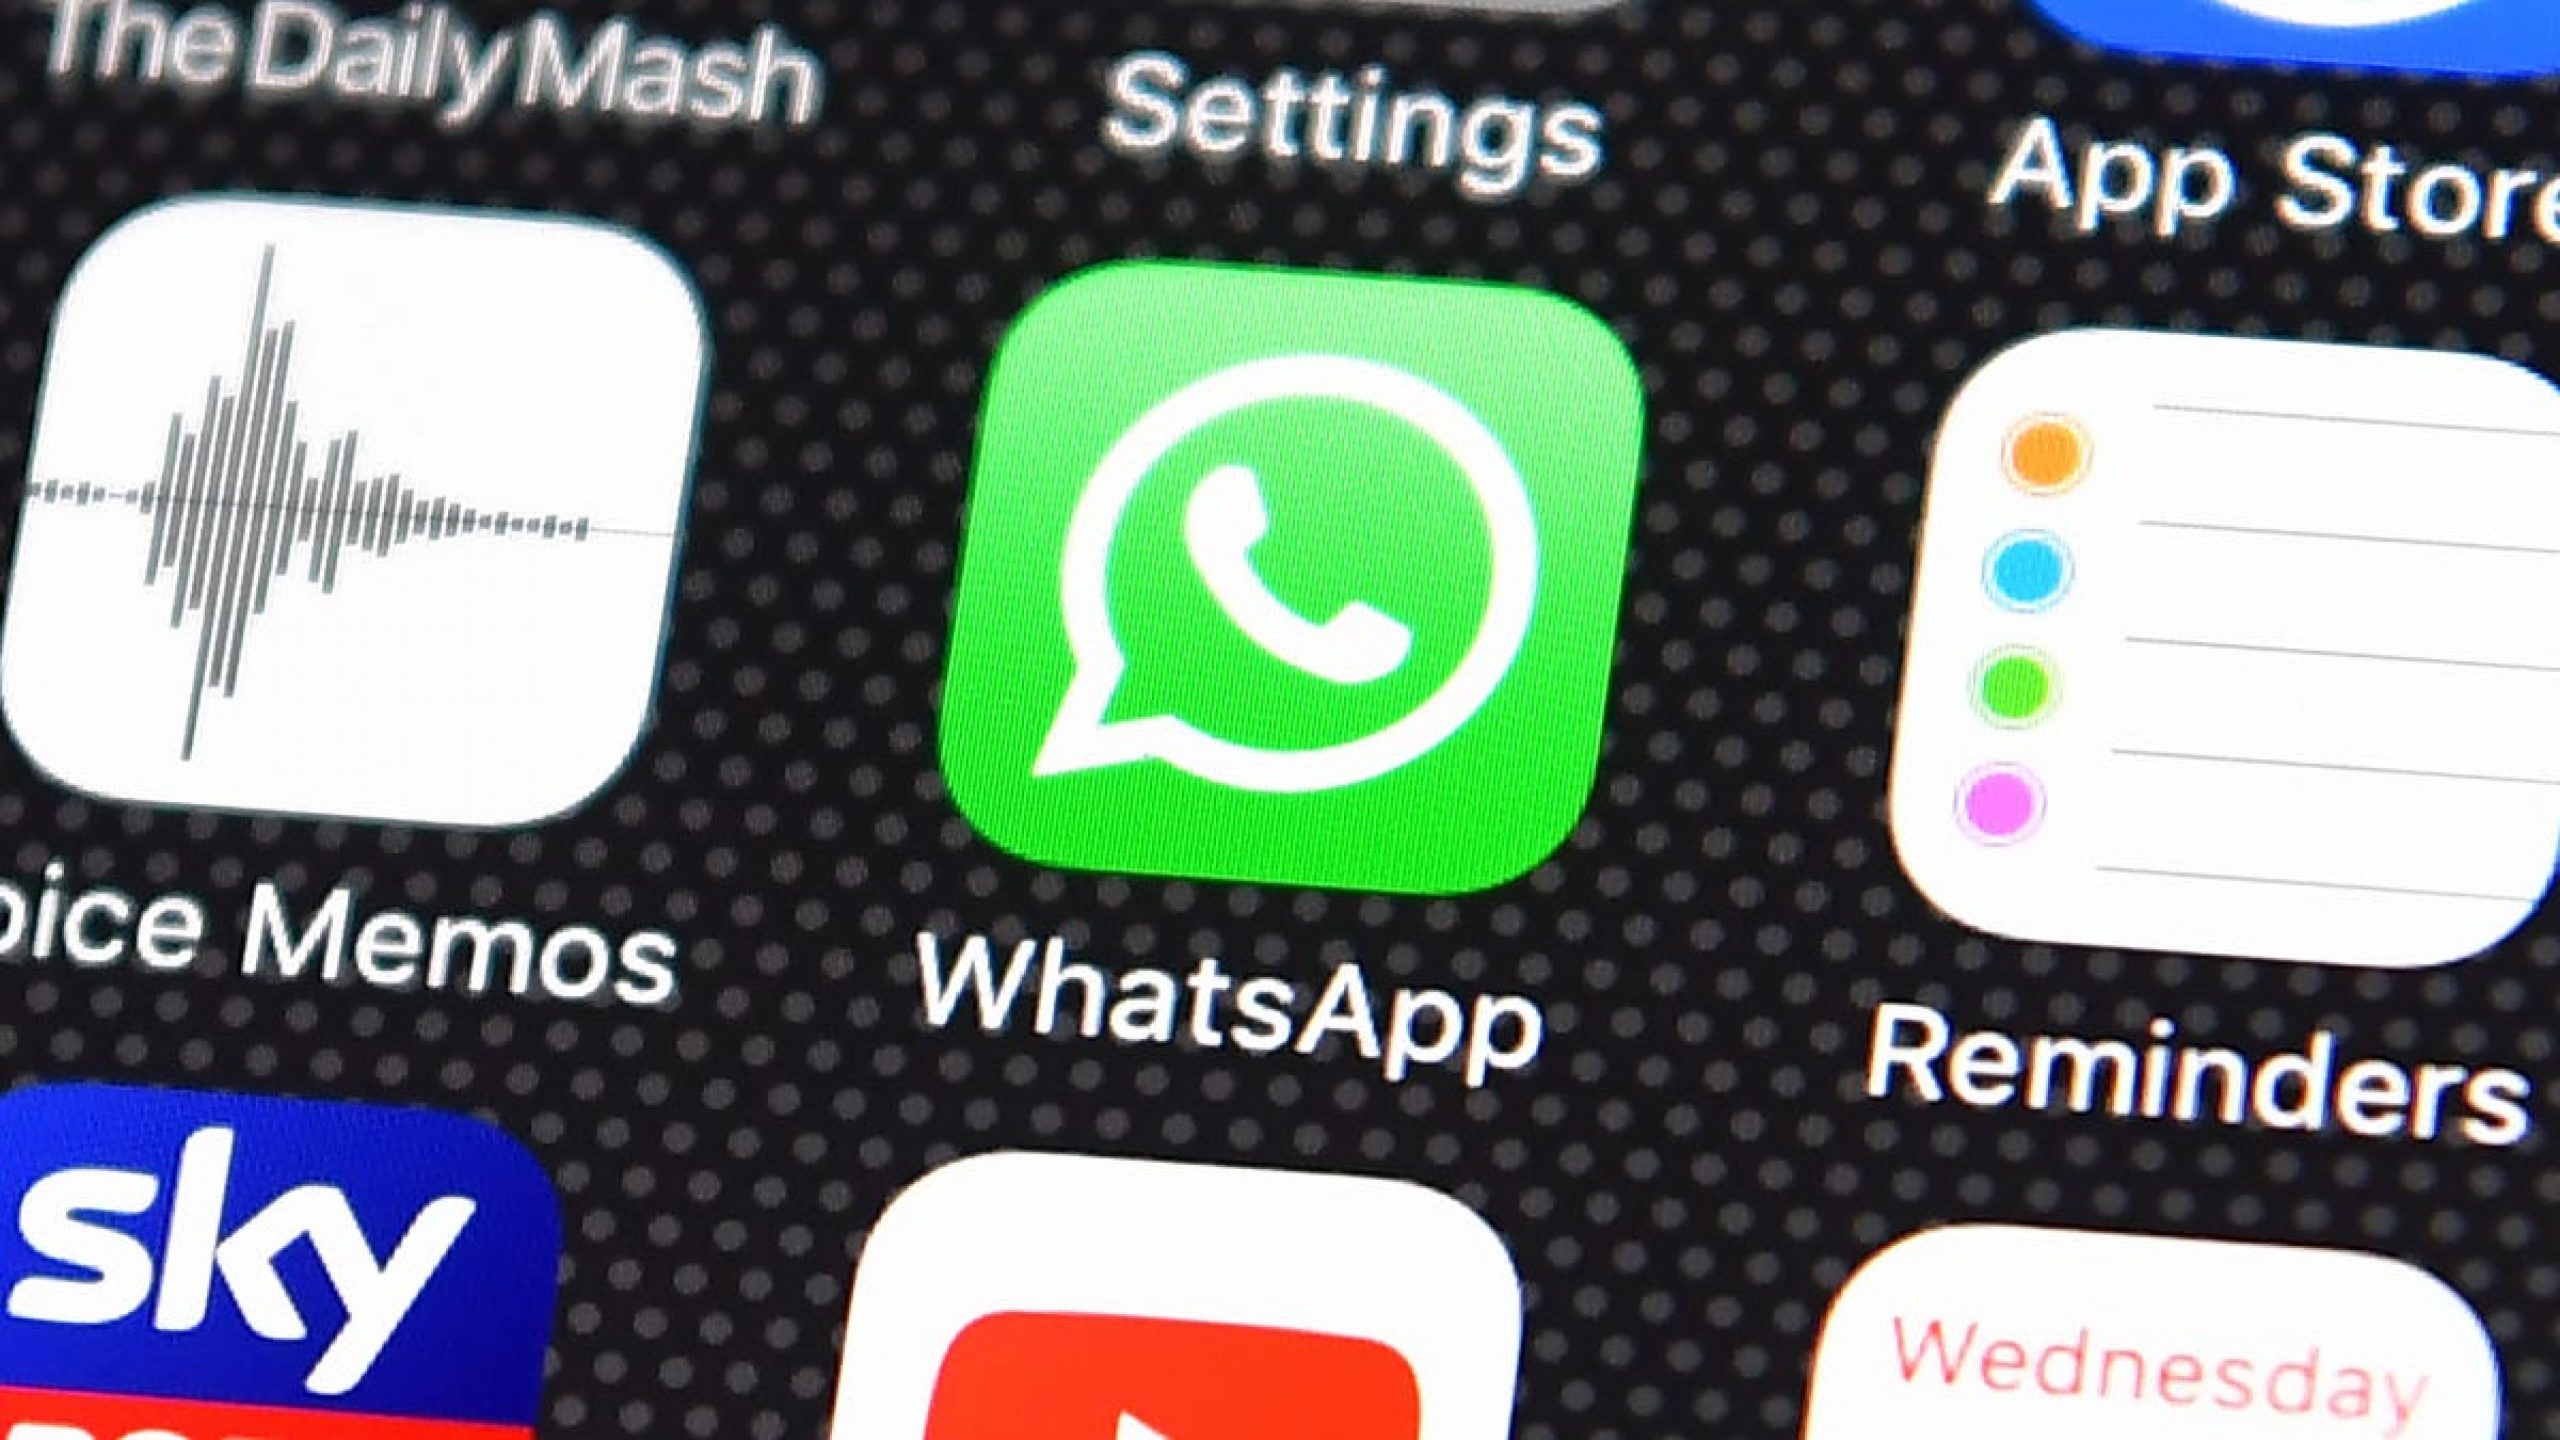 WhatsApp Says It Won’t Be Scanning Your Photos for Child Abuse